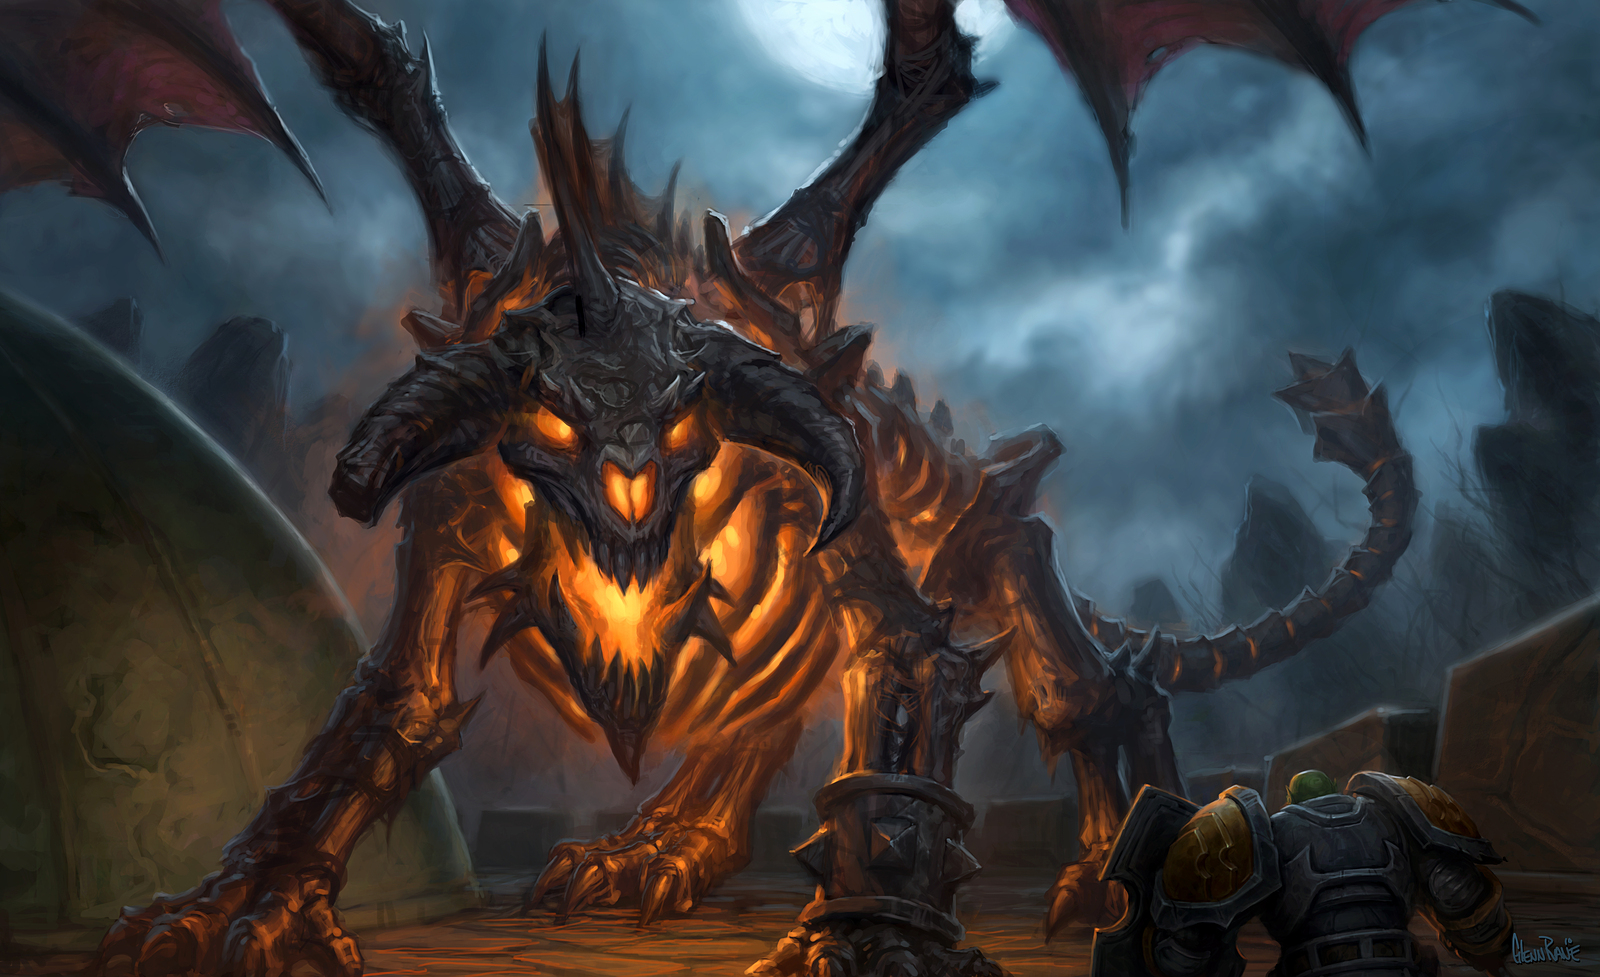 video game, world of warcraft: the burning crusade, dragon, world of warcraft, warcraft